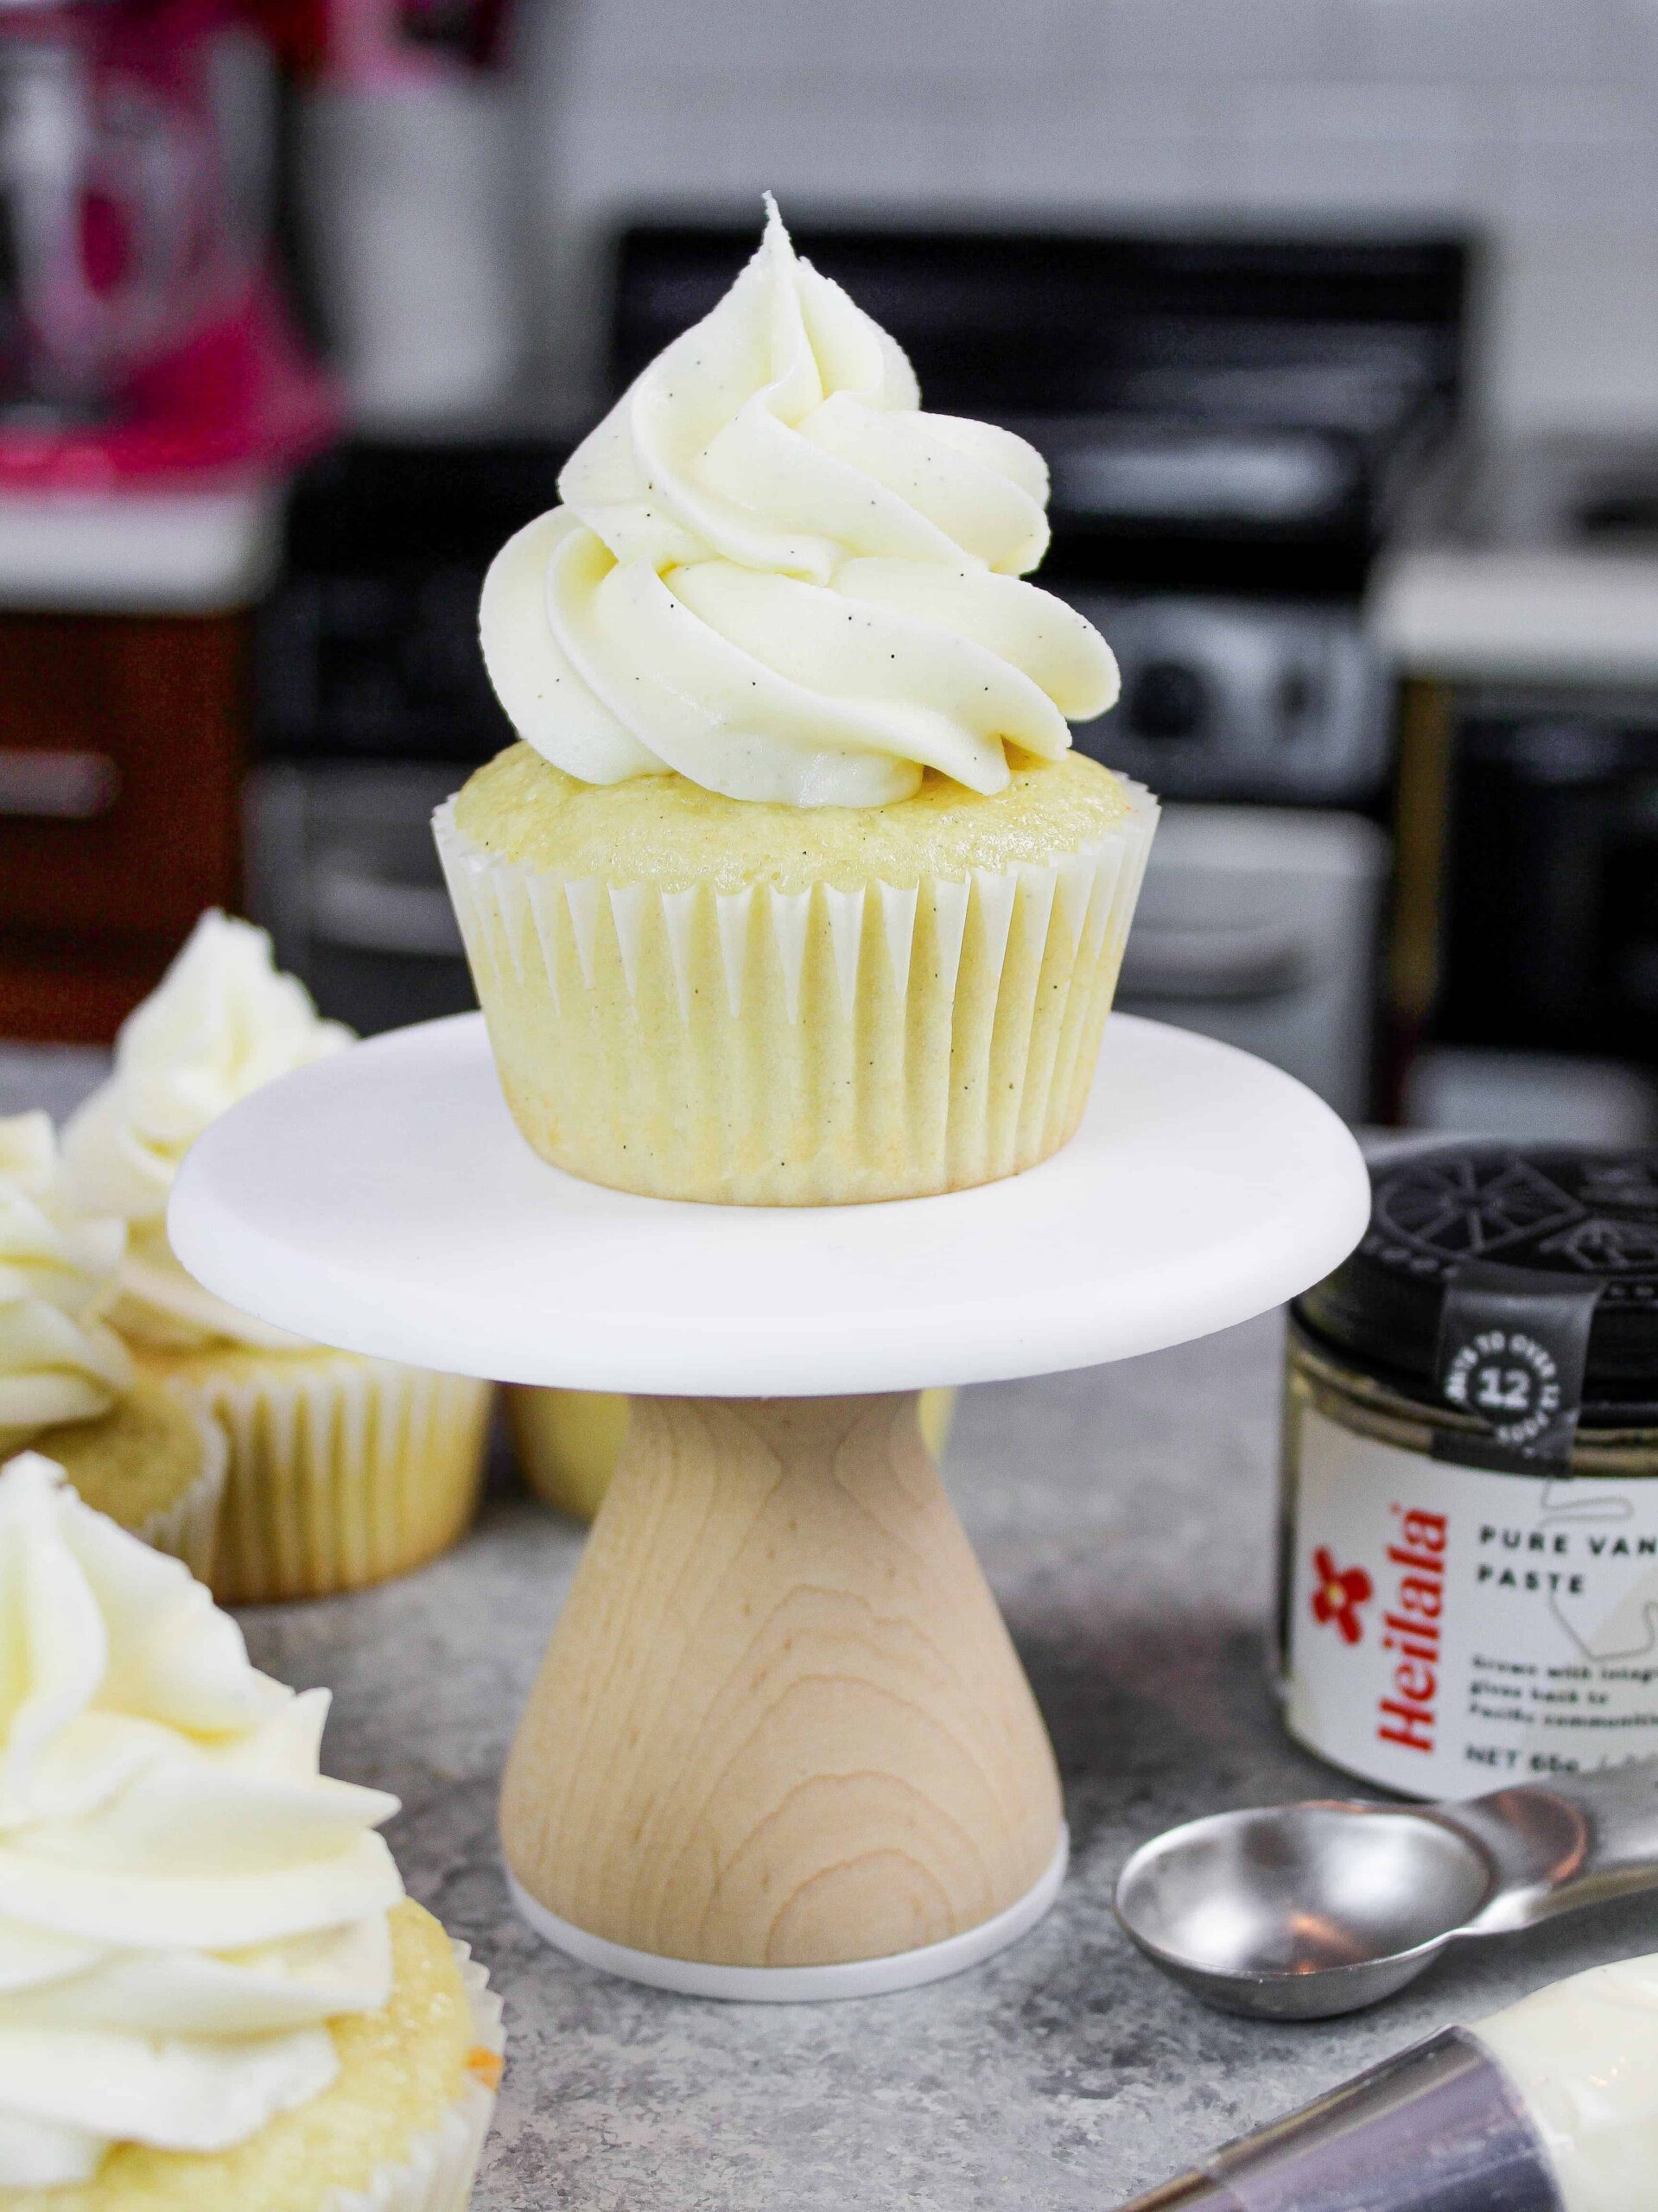 image of gluten free vanilla cupcake frosted with buttercream icing on mini cupcake stand